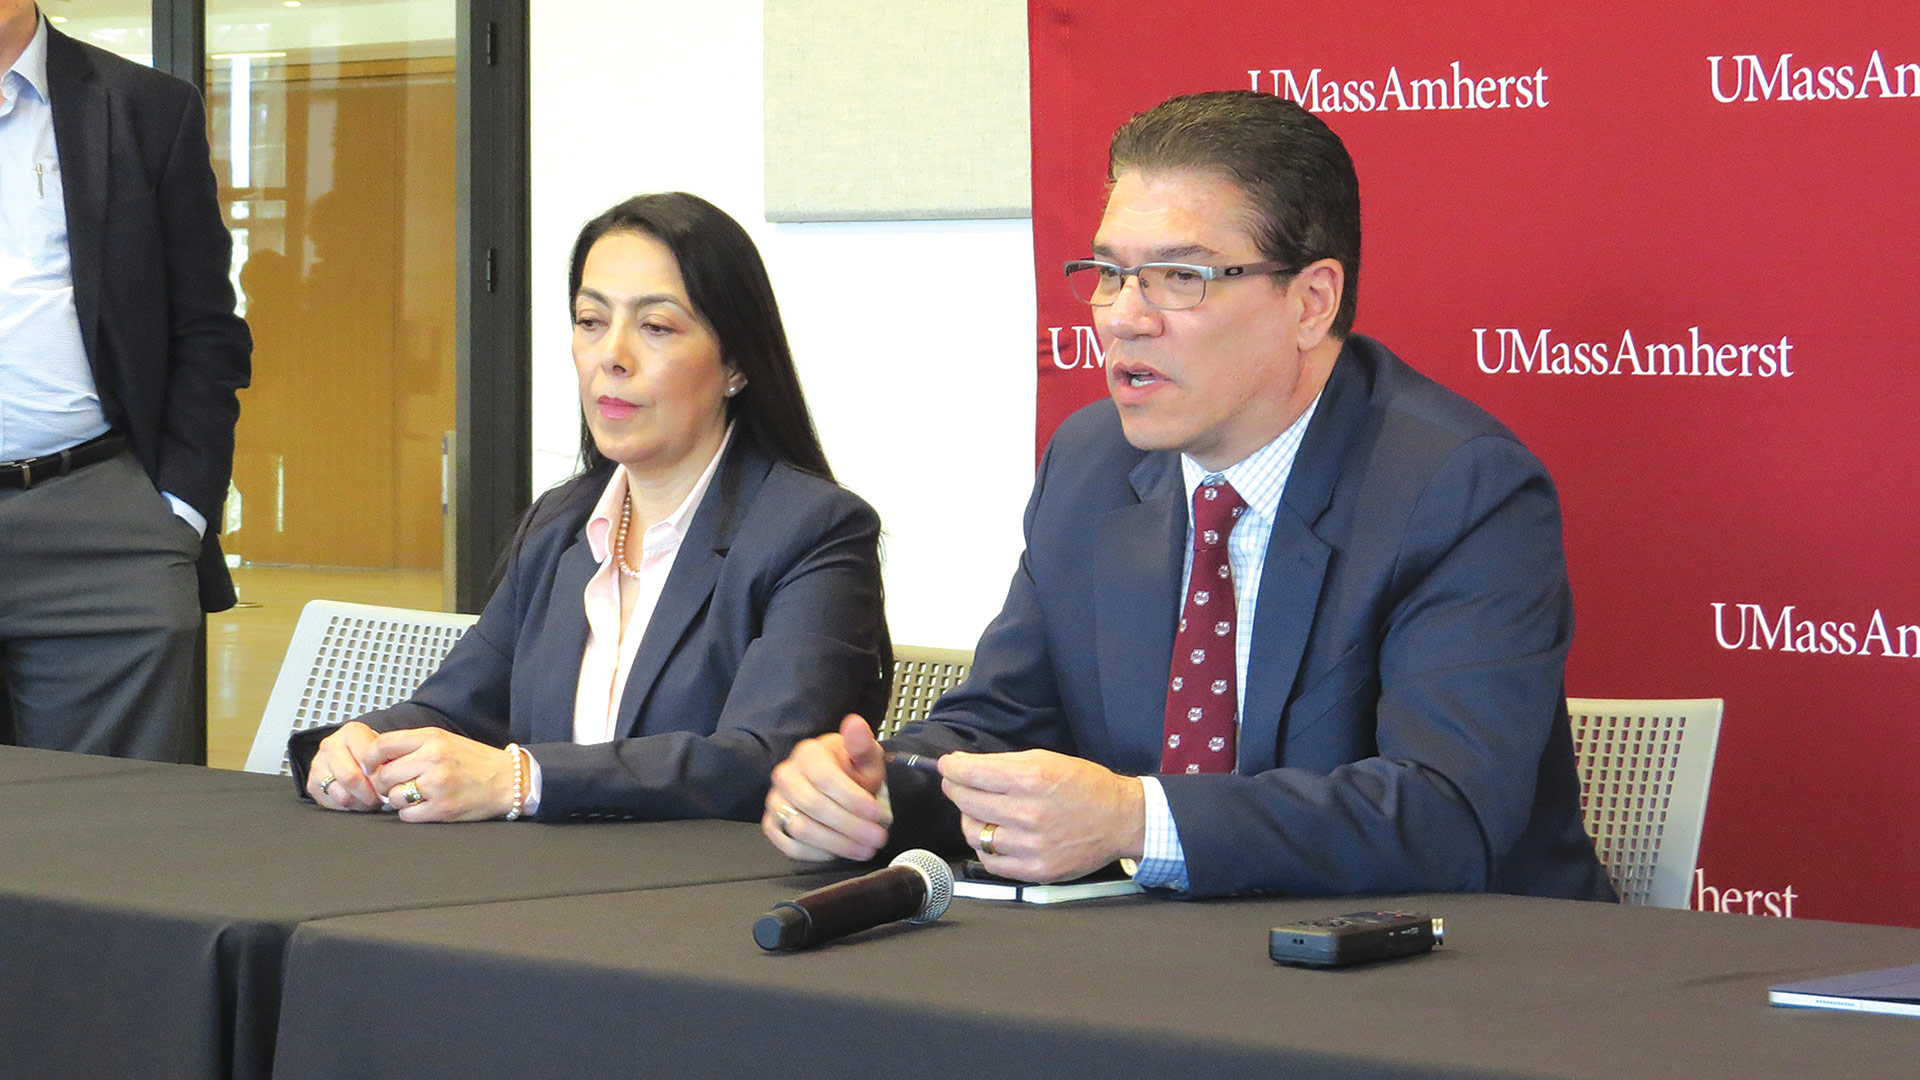 Javier Reyes (right), the next chancellor of UMass Amherst